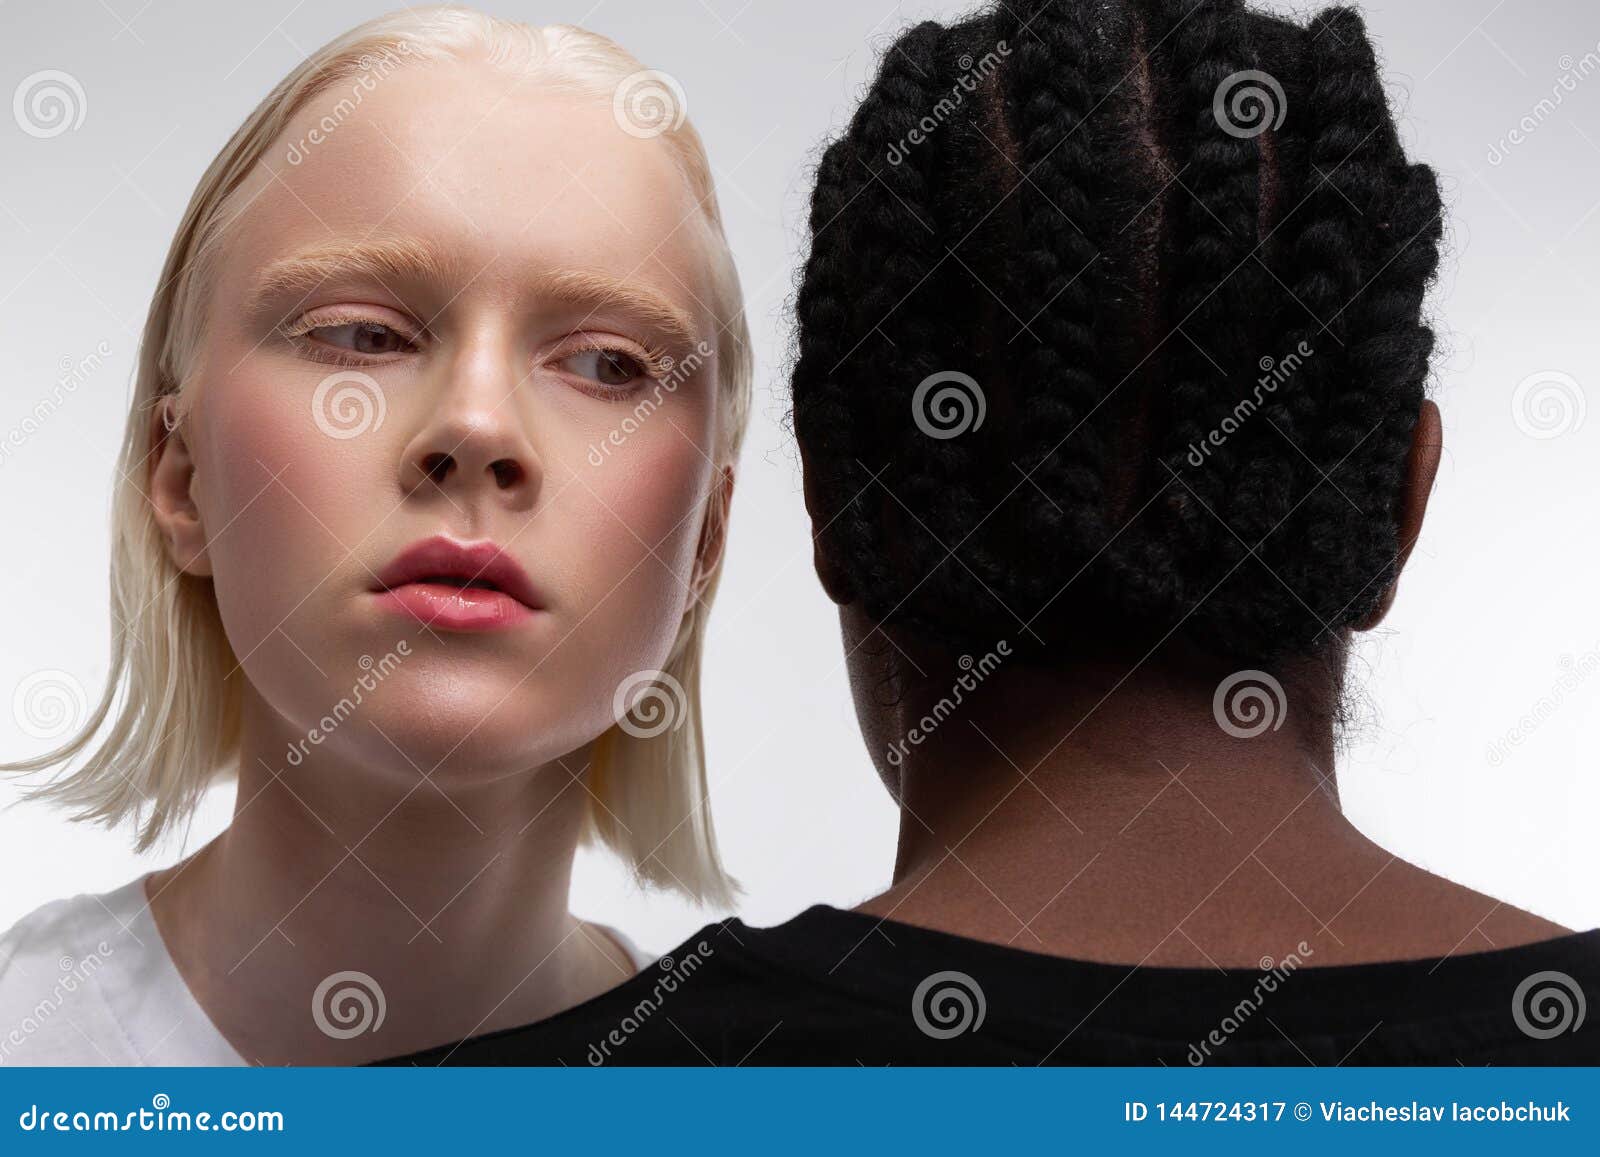 Appealing Woman With Blonde Hair Standing Near Dark Skinned Person Stock Image Image Of Sisterhood Support 144724317